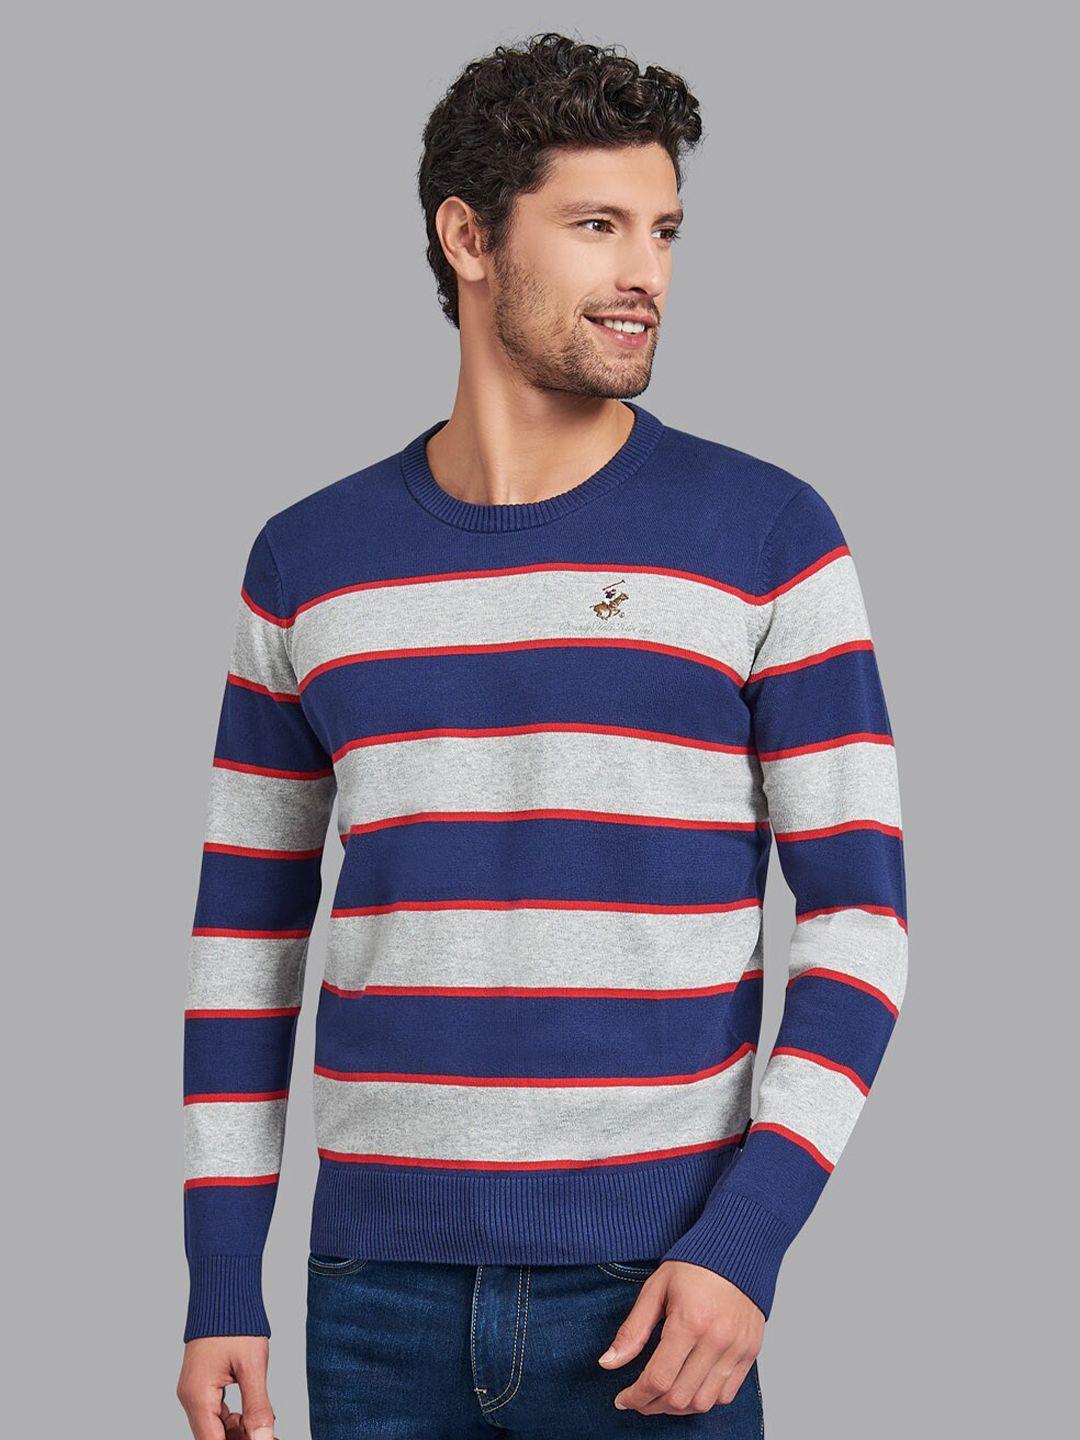 beverly-hills-polo-club-men-navy-blue-&-grey-striped-pullover